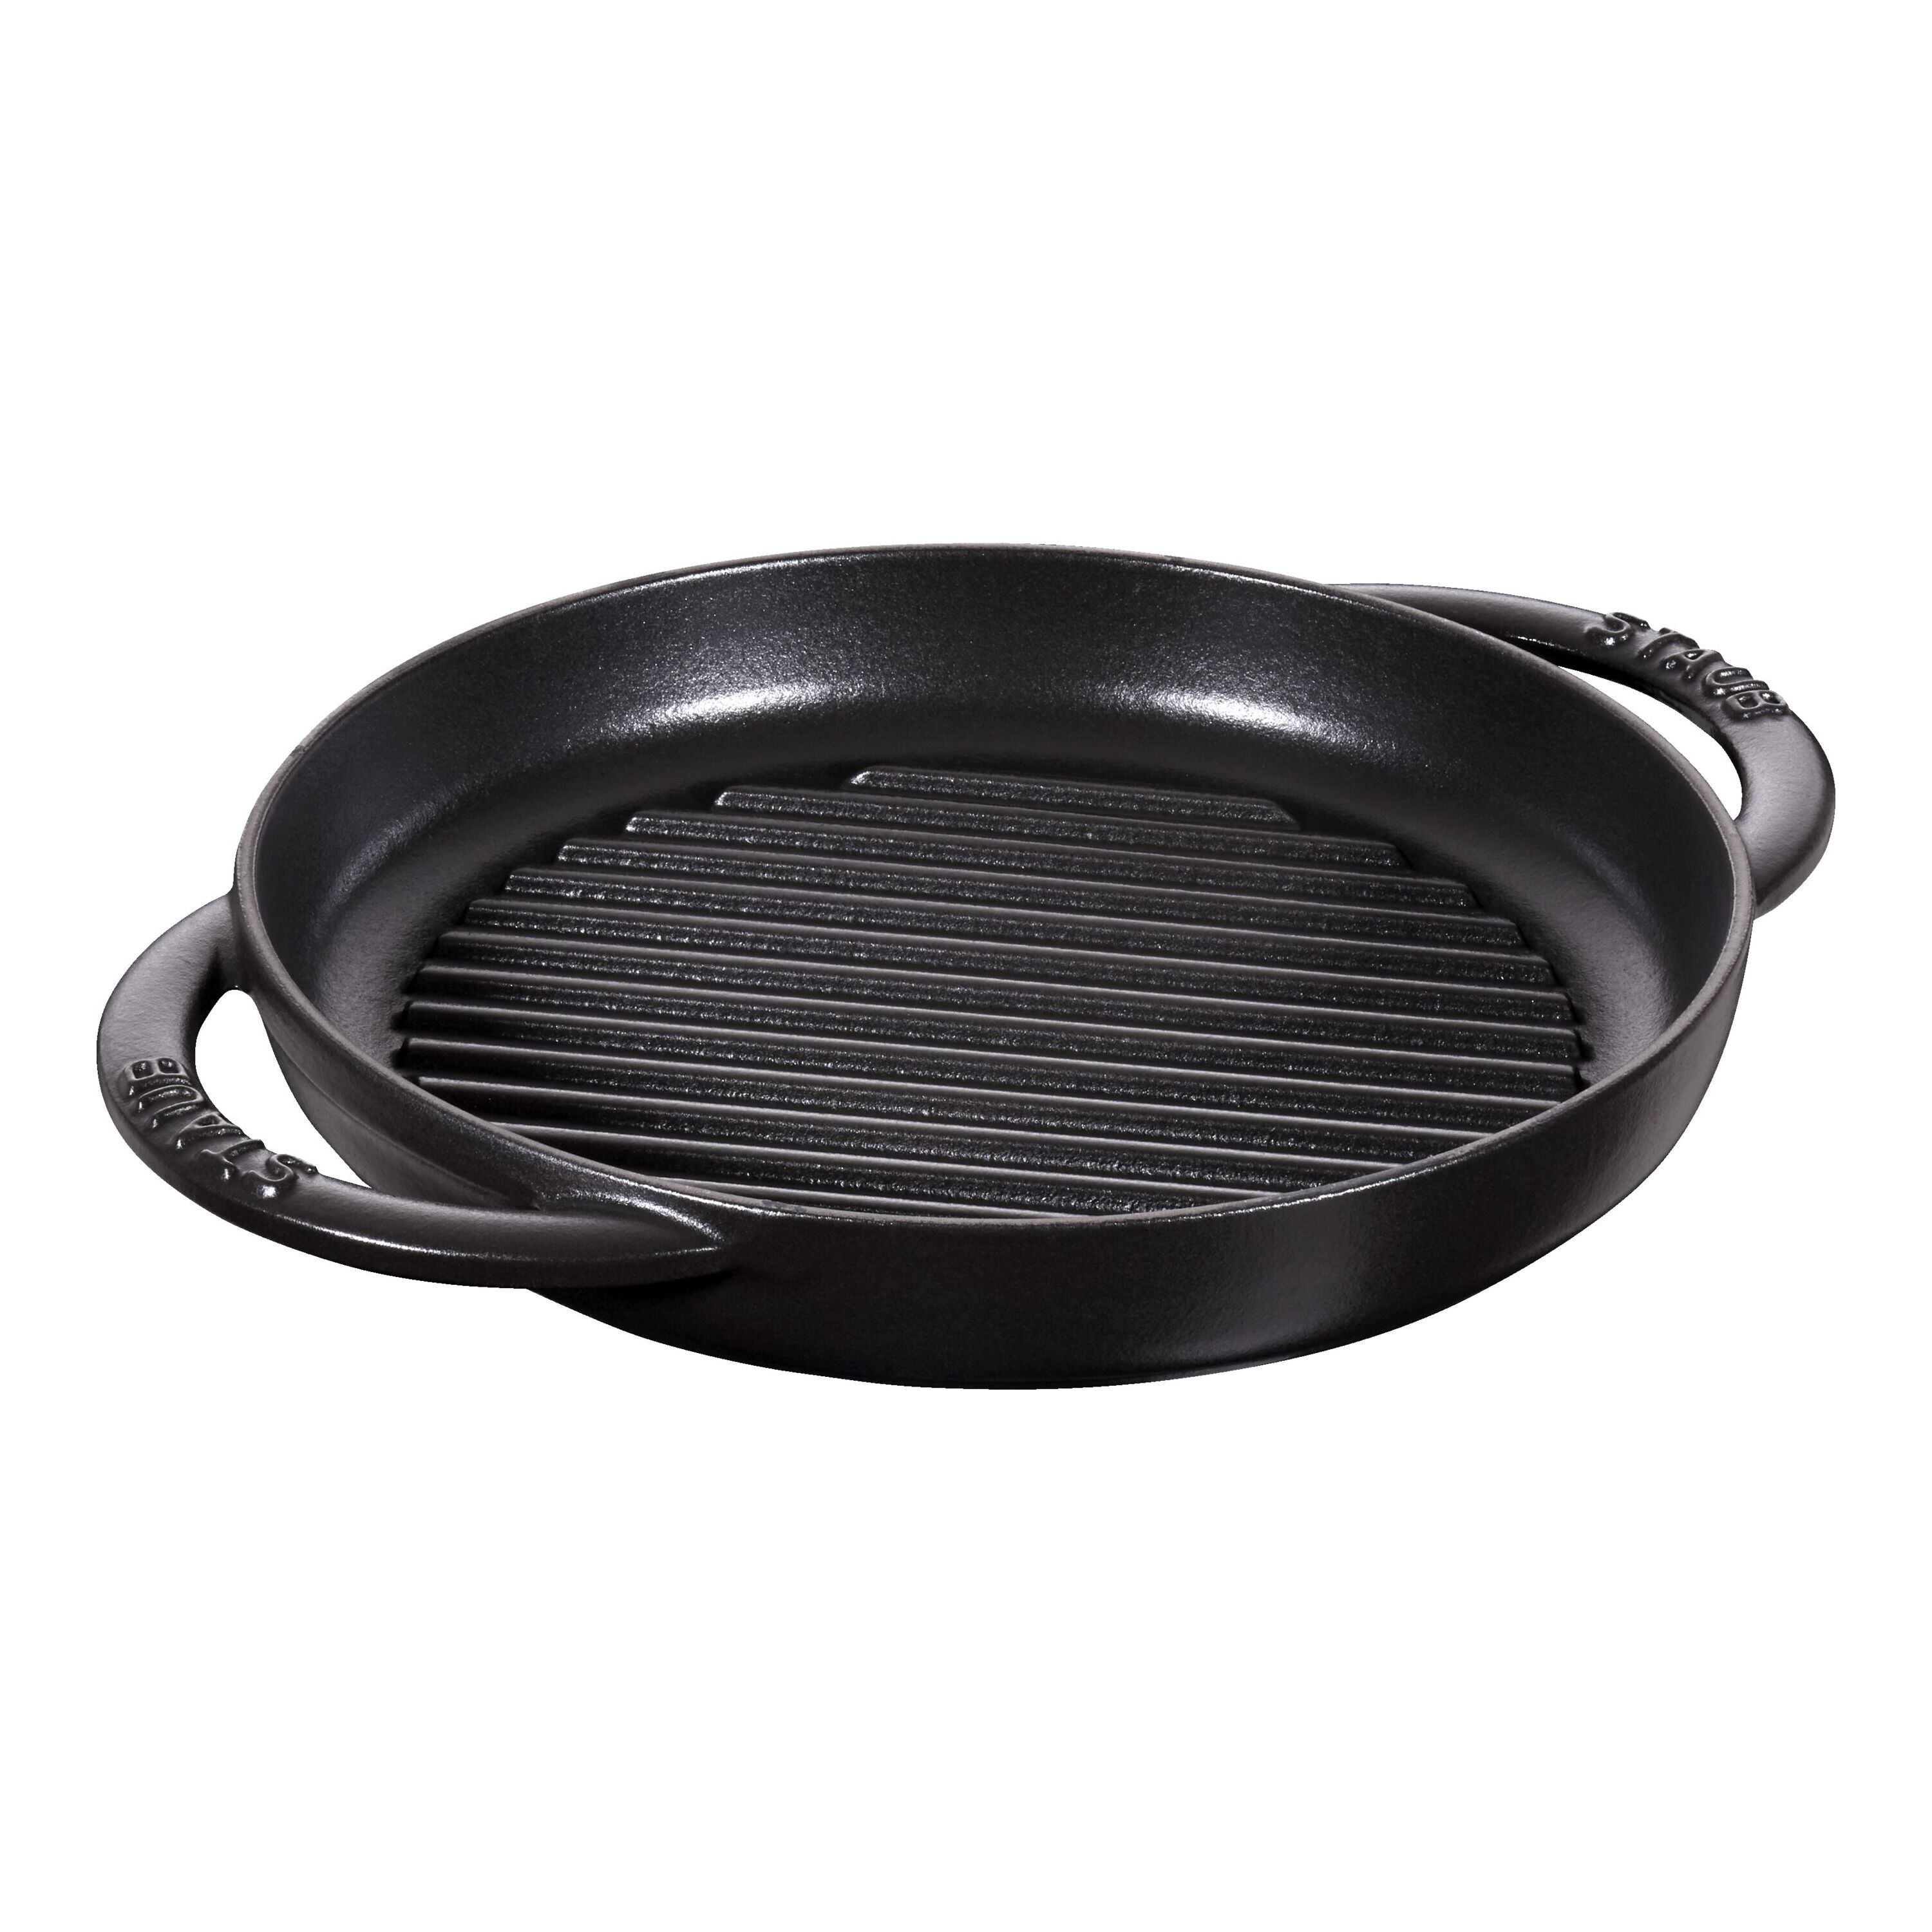 Buy Cast Iron Grill Pan / Fish pan Double Handle 11 inch Online at